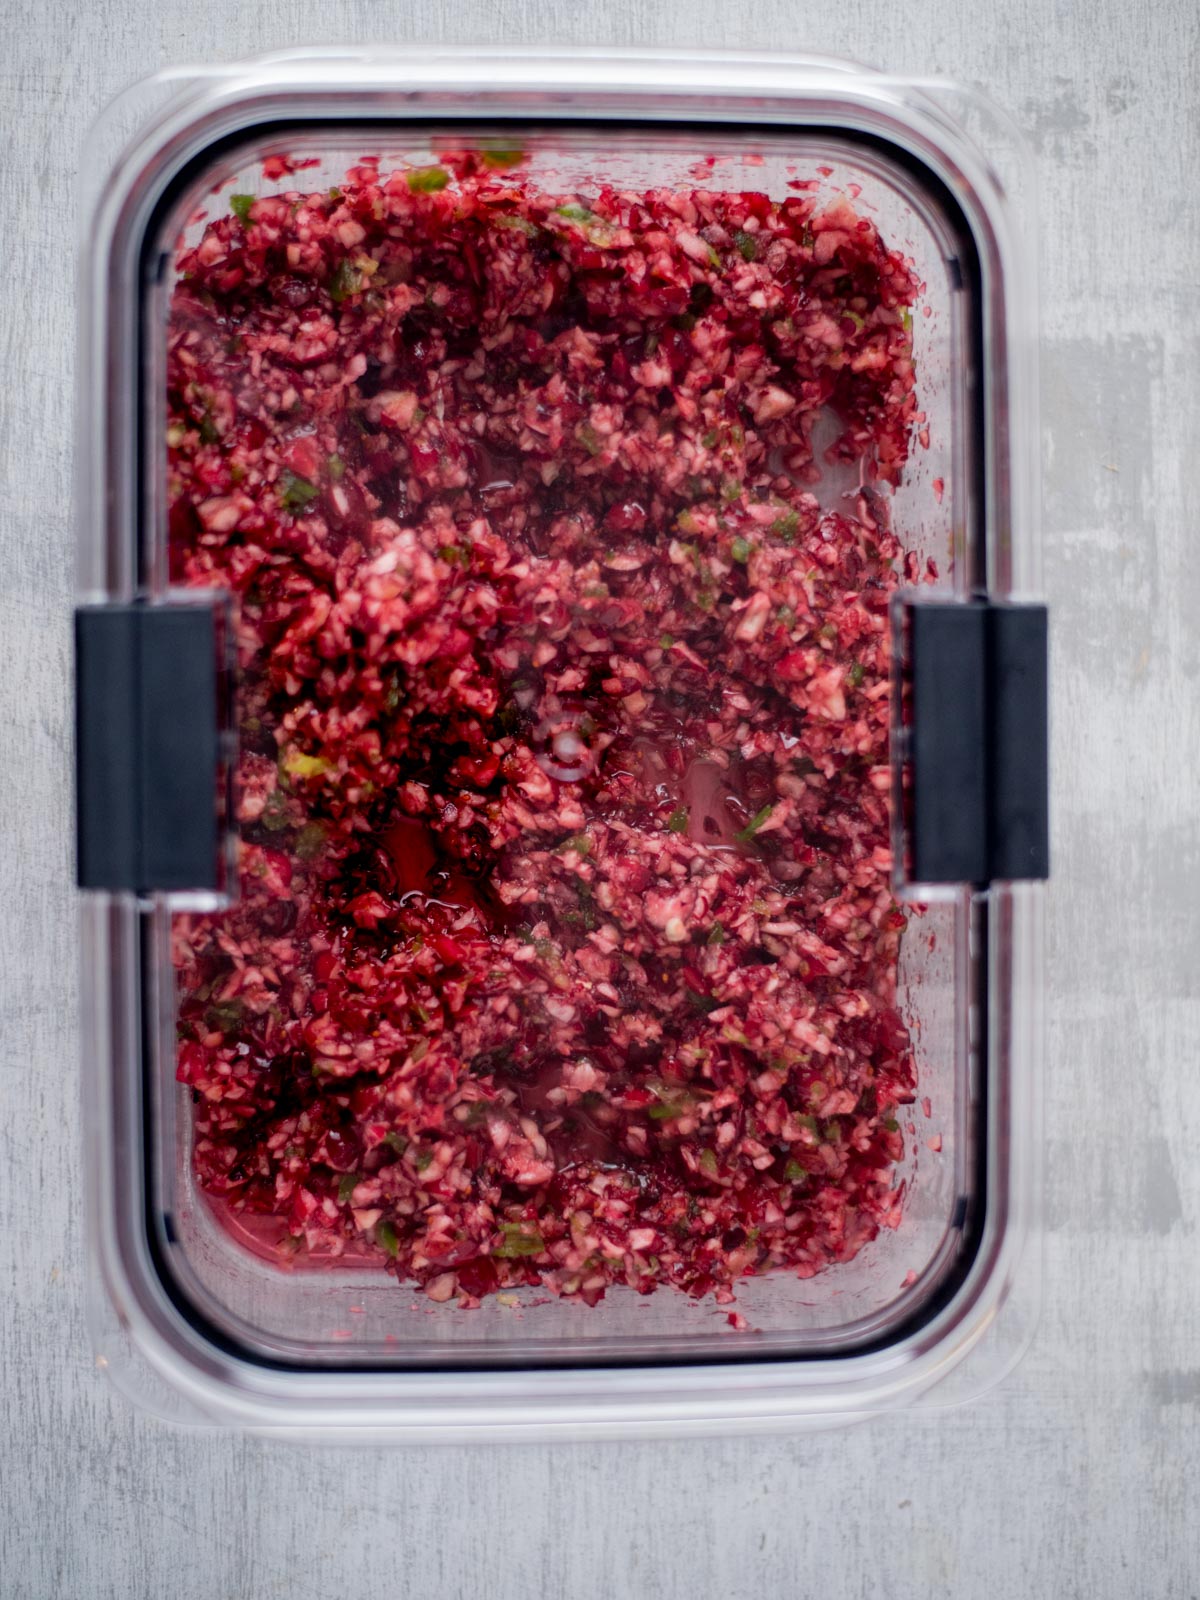 Cranberry jalapeno salsa in an airtight container.